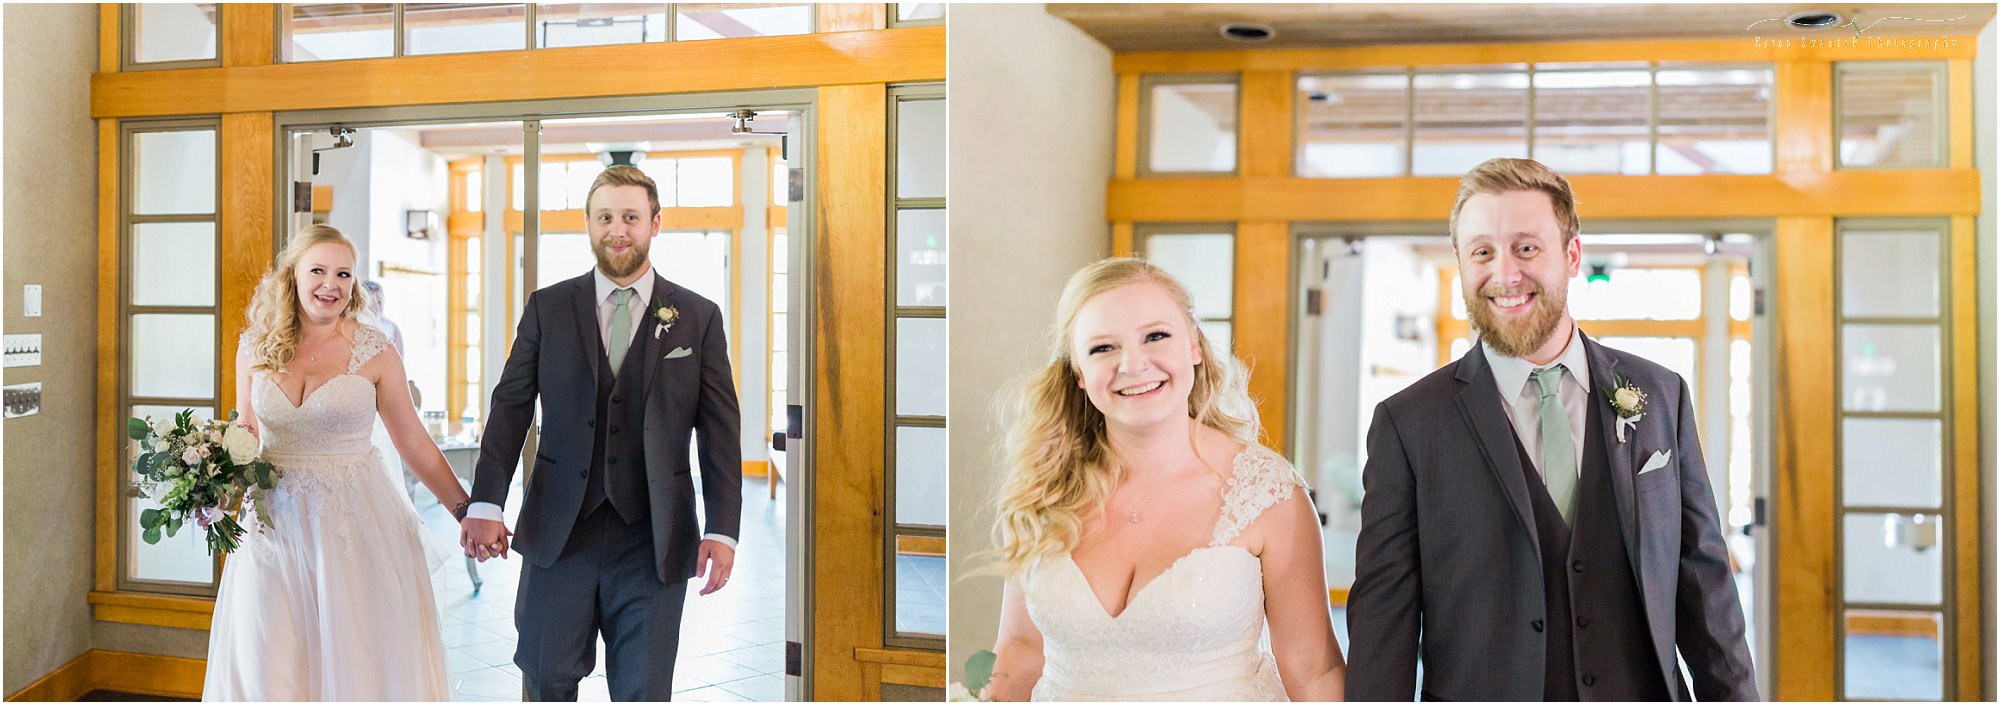 A couple makes their grand entrance into the reception at Aspen Hall in Bend, OR. | Erica Swantek Photography